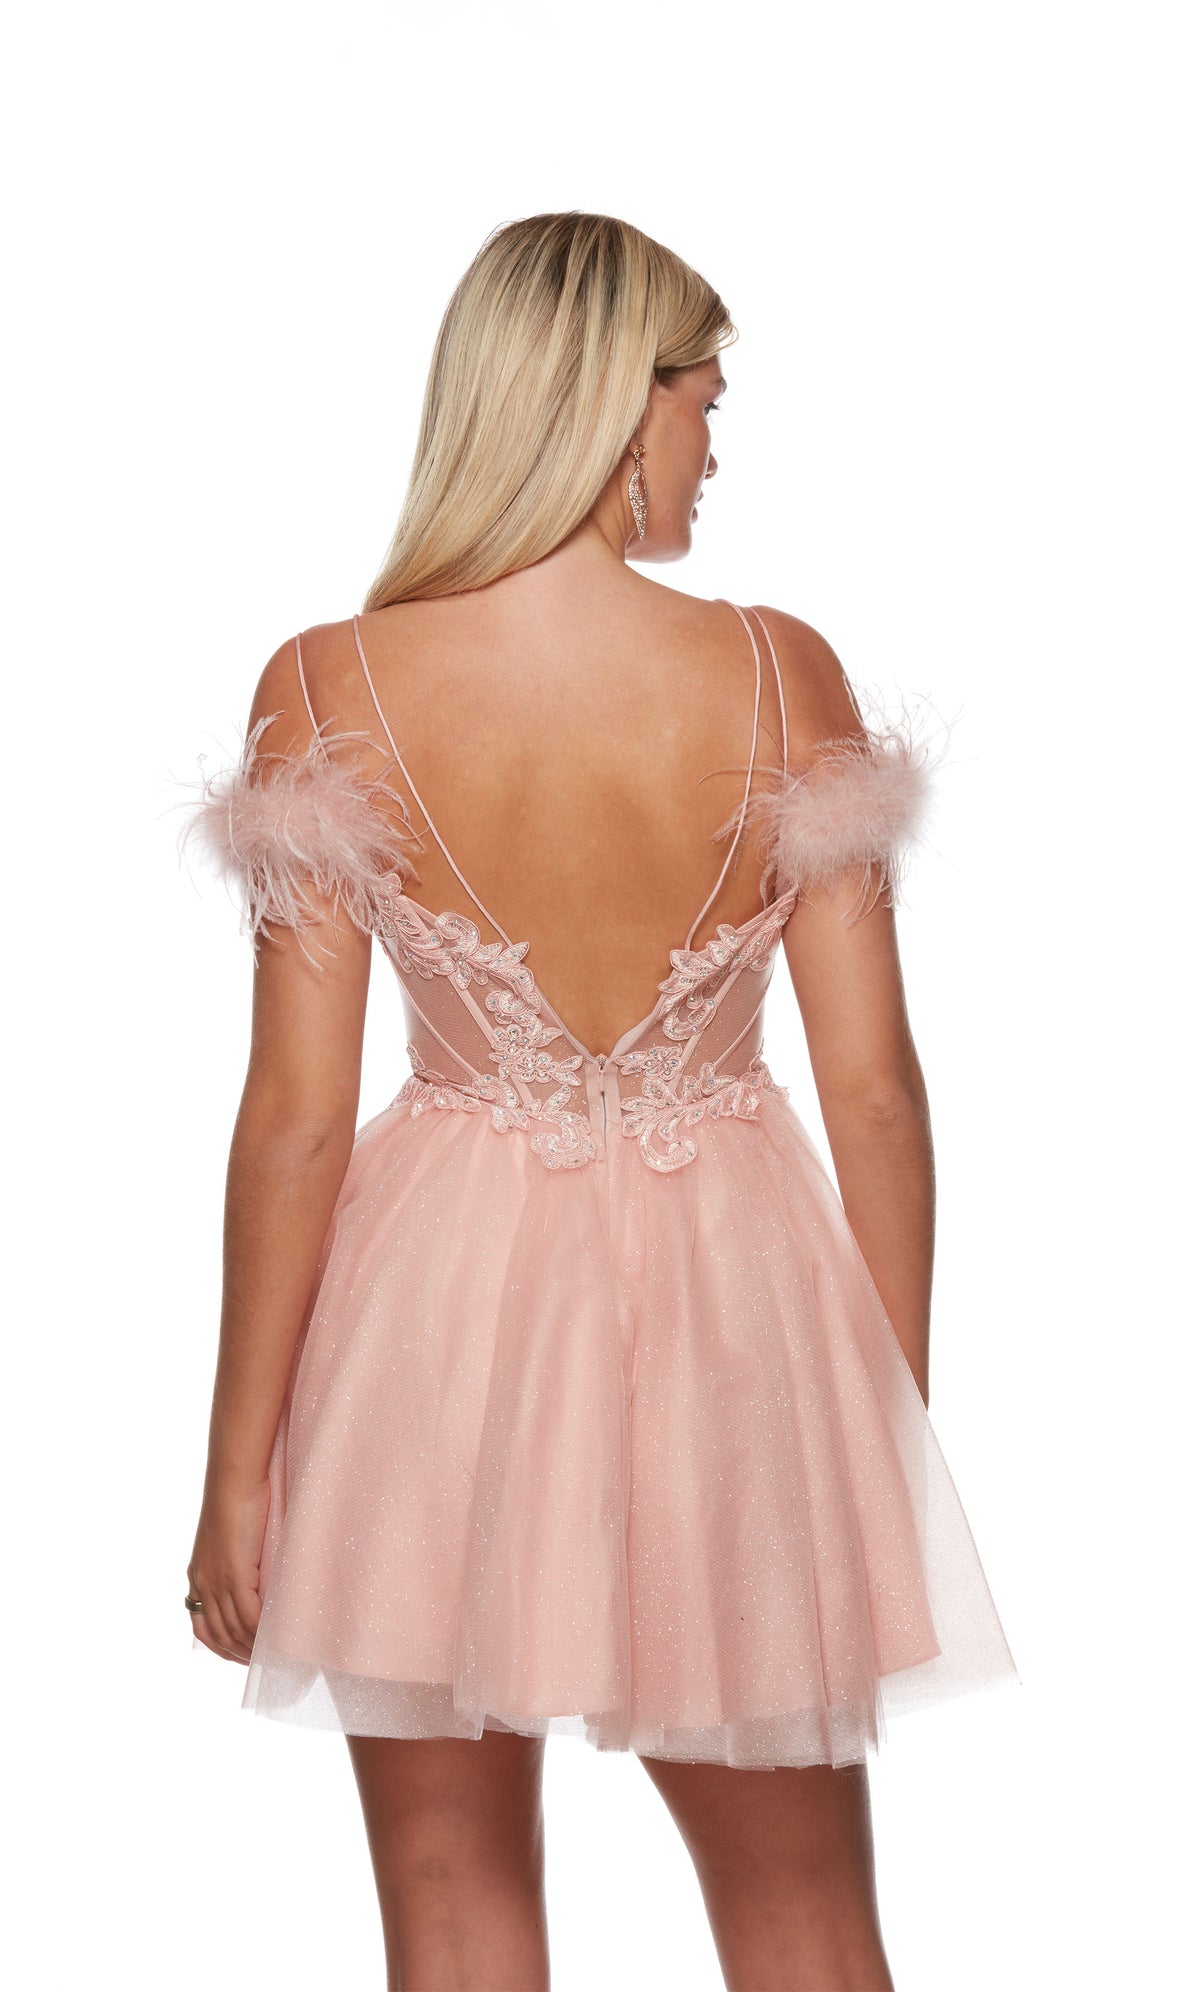 A sparkly off-the-shoulder short corset dress with spaghetti straps, adorned with intricate lace detailing and feather trim, designed to make a stylish statement.